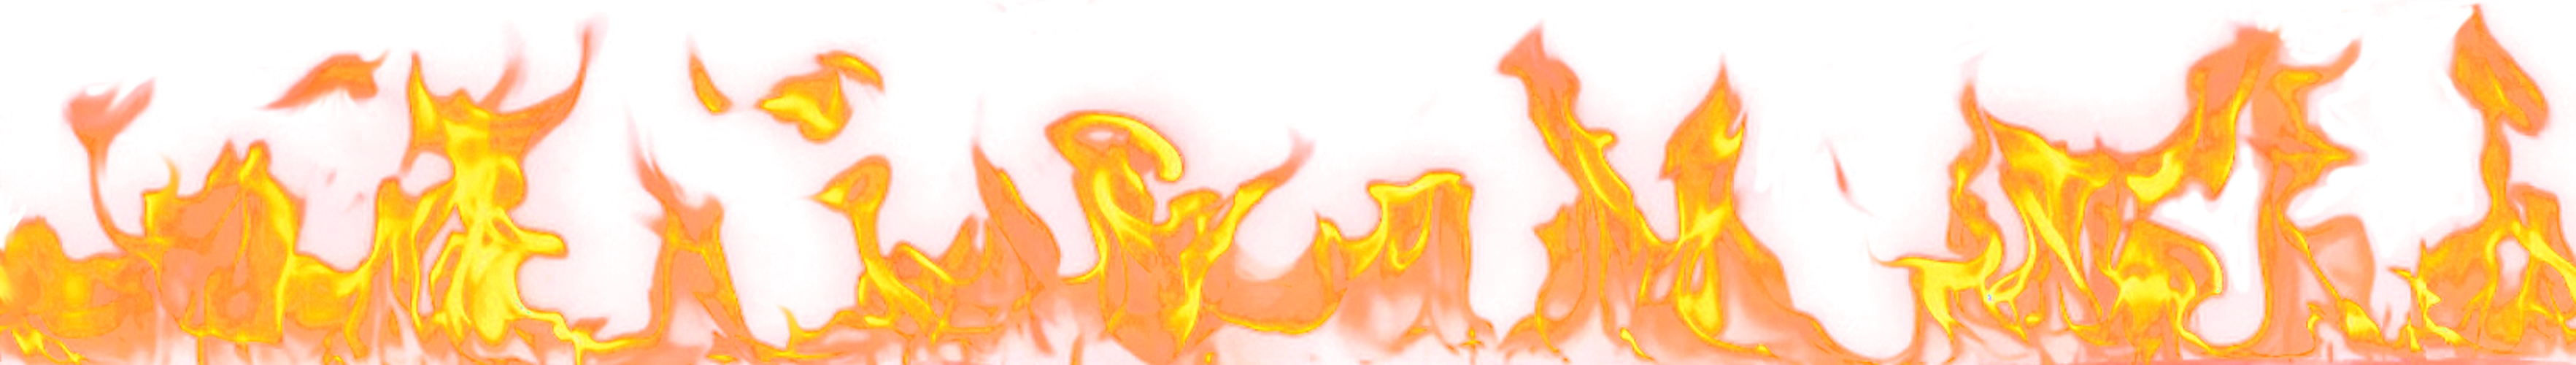 Fire Border Flame Free Download Image PNG Image